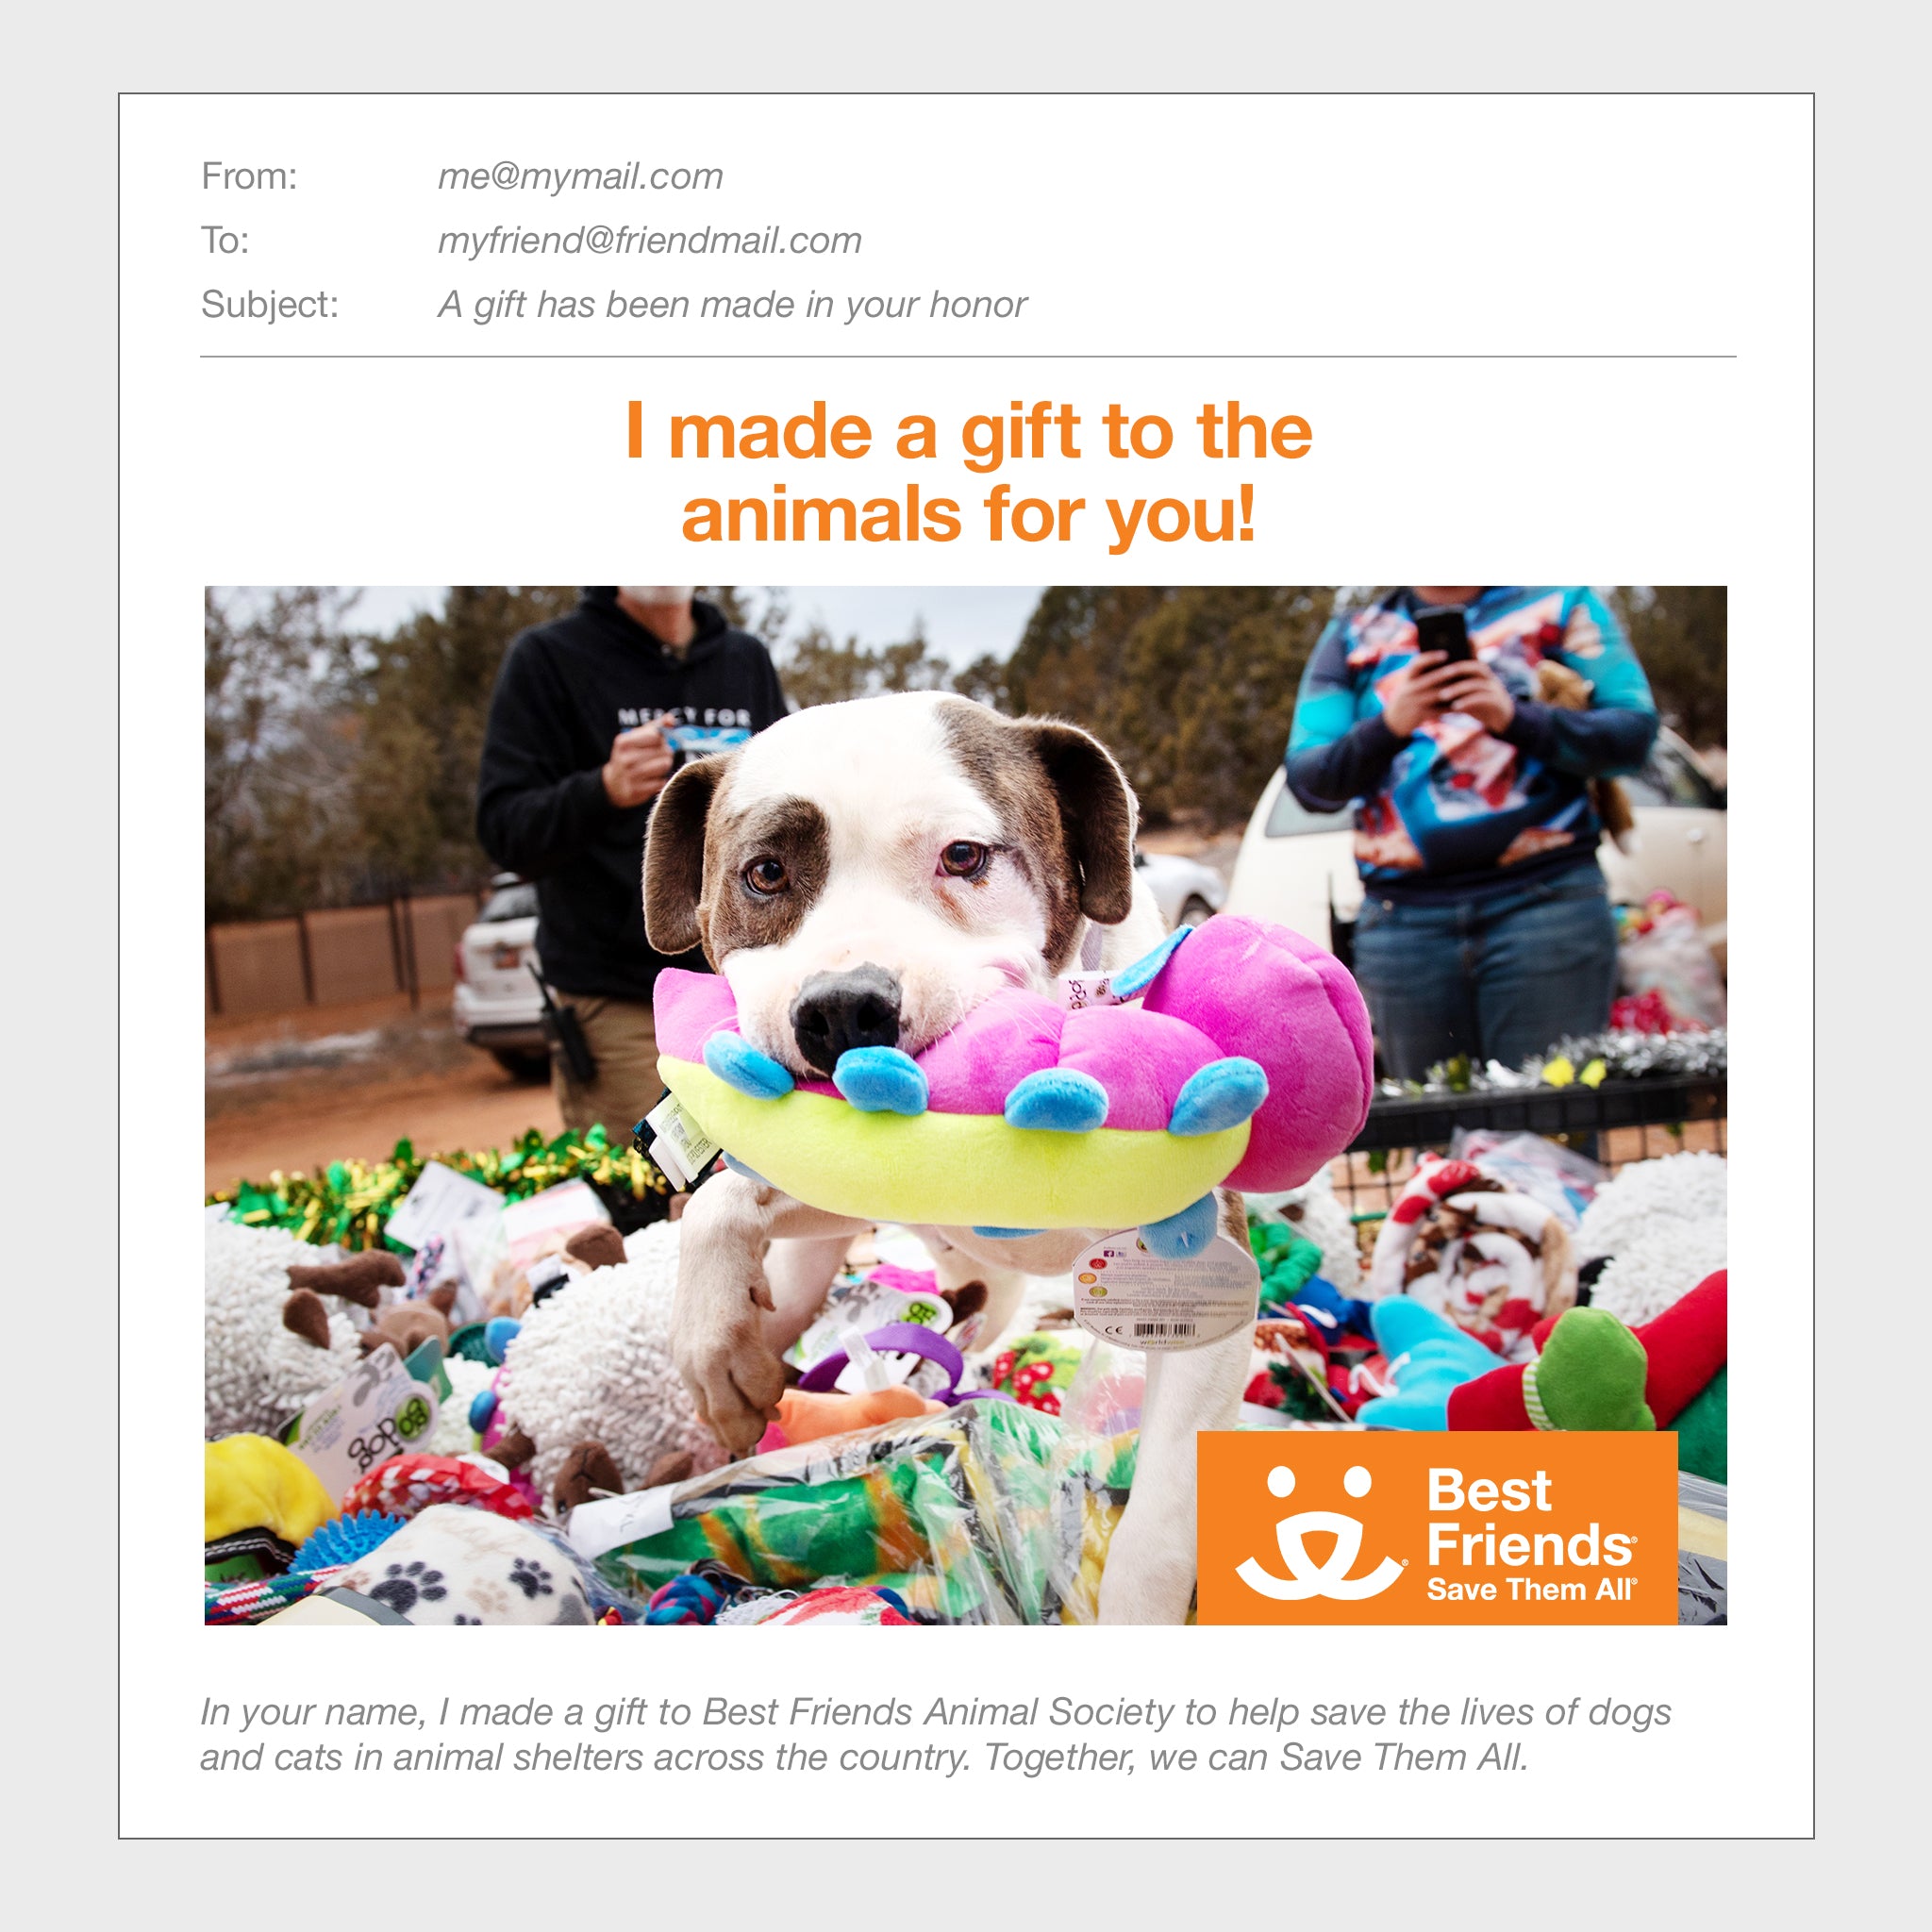 Gift Catalog: Dog Enrichment Toys – Best Friends Animal Society's Catalog  of Kindness